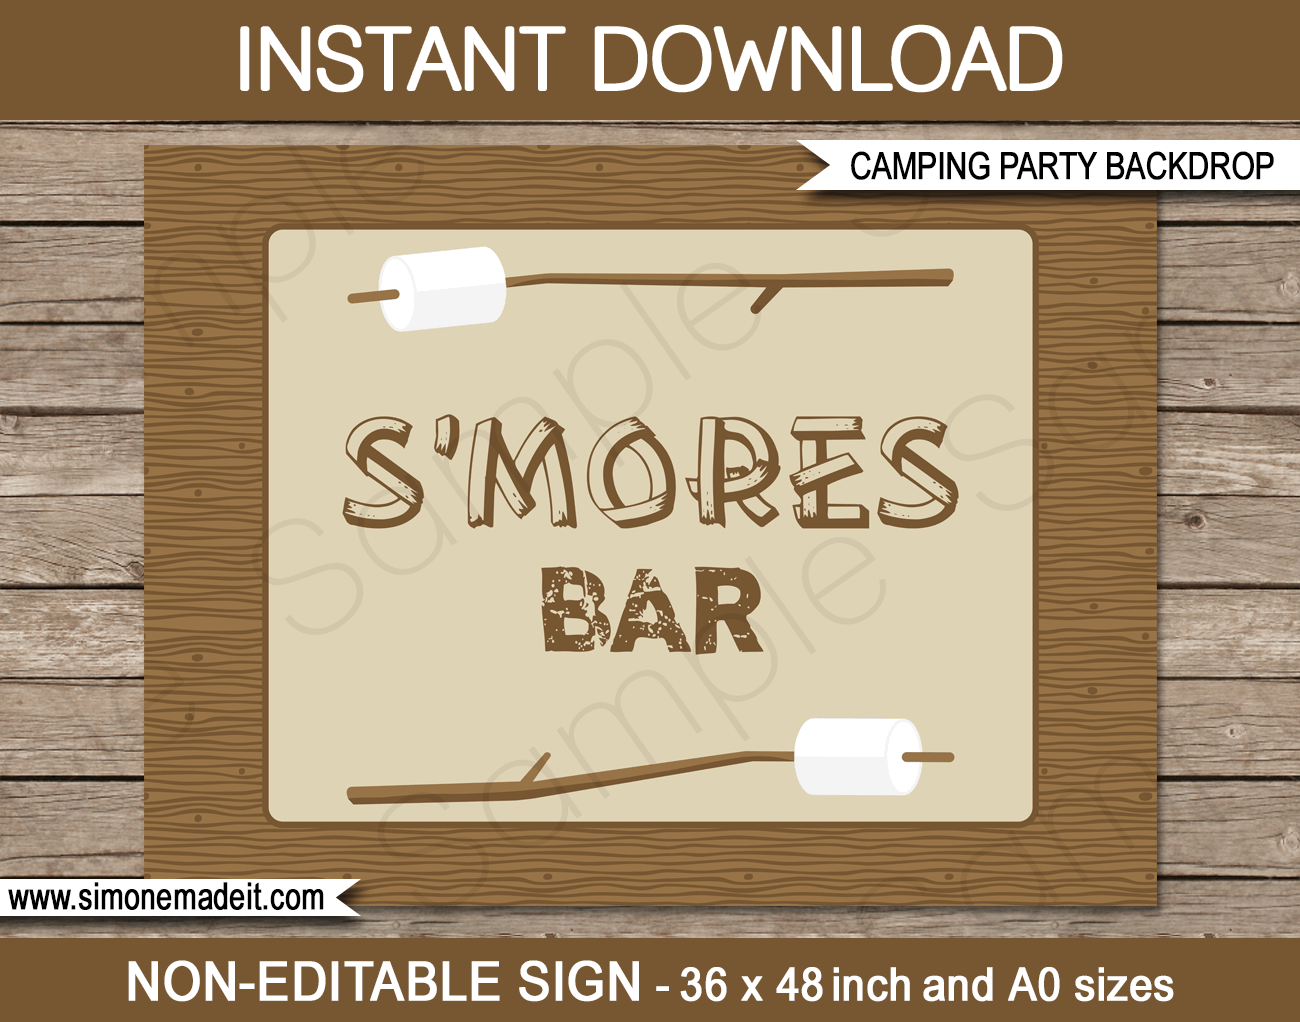 Camping Party S'mores Bar Backdrop | Printable DIY Template | Party Decorations | 36x48 inches | A0 | $4.50 Instant Download via SIMONEmadeit.com